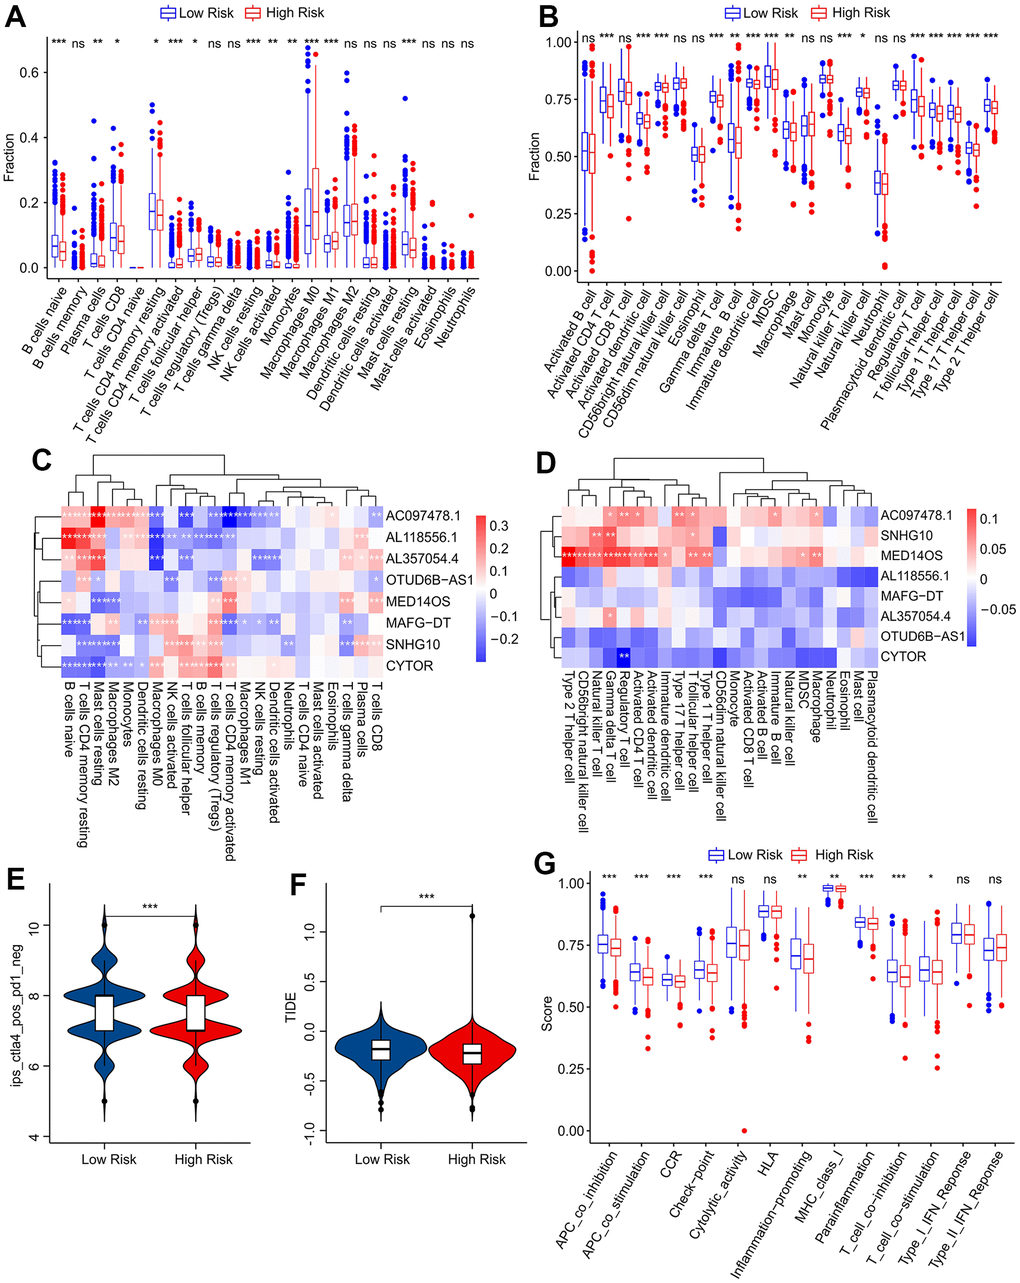 Immune infiltration landscape and immune response analysis of patients with breast cancer. The fraction of immune cells calculated by (A) CIBERSORT and (B) ssGSEA algorithms. (C) Correlation analysis of prognostic ARL and 22 types of immune cells. (D) Correlation analysis of prognostic ARL and 23 types of immune cells. (E) Immunophenoscore (IPS) analysis. (F) Tumor immune dysfunction and exclusion (TIDE) analysis. (G) Immune function score of patients in low-risk group and high-risk group.